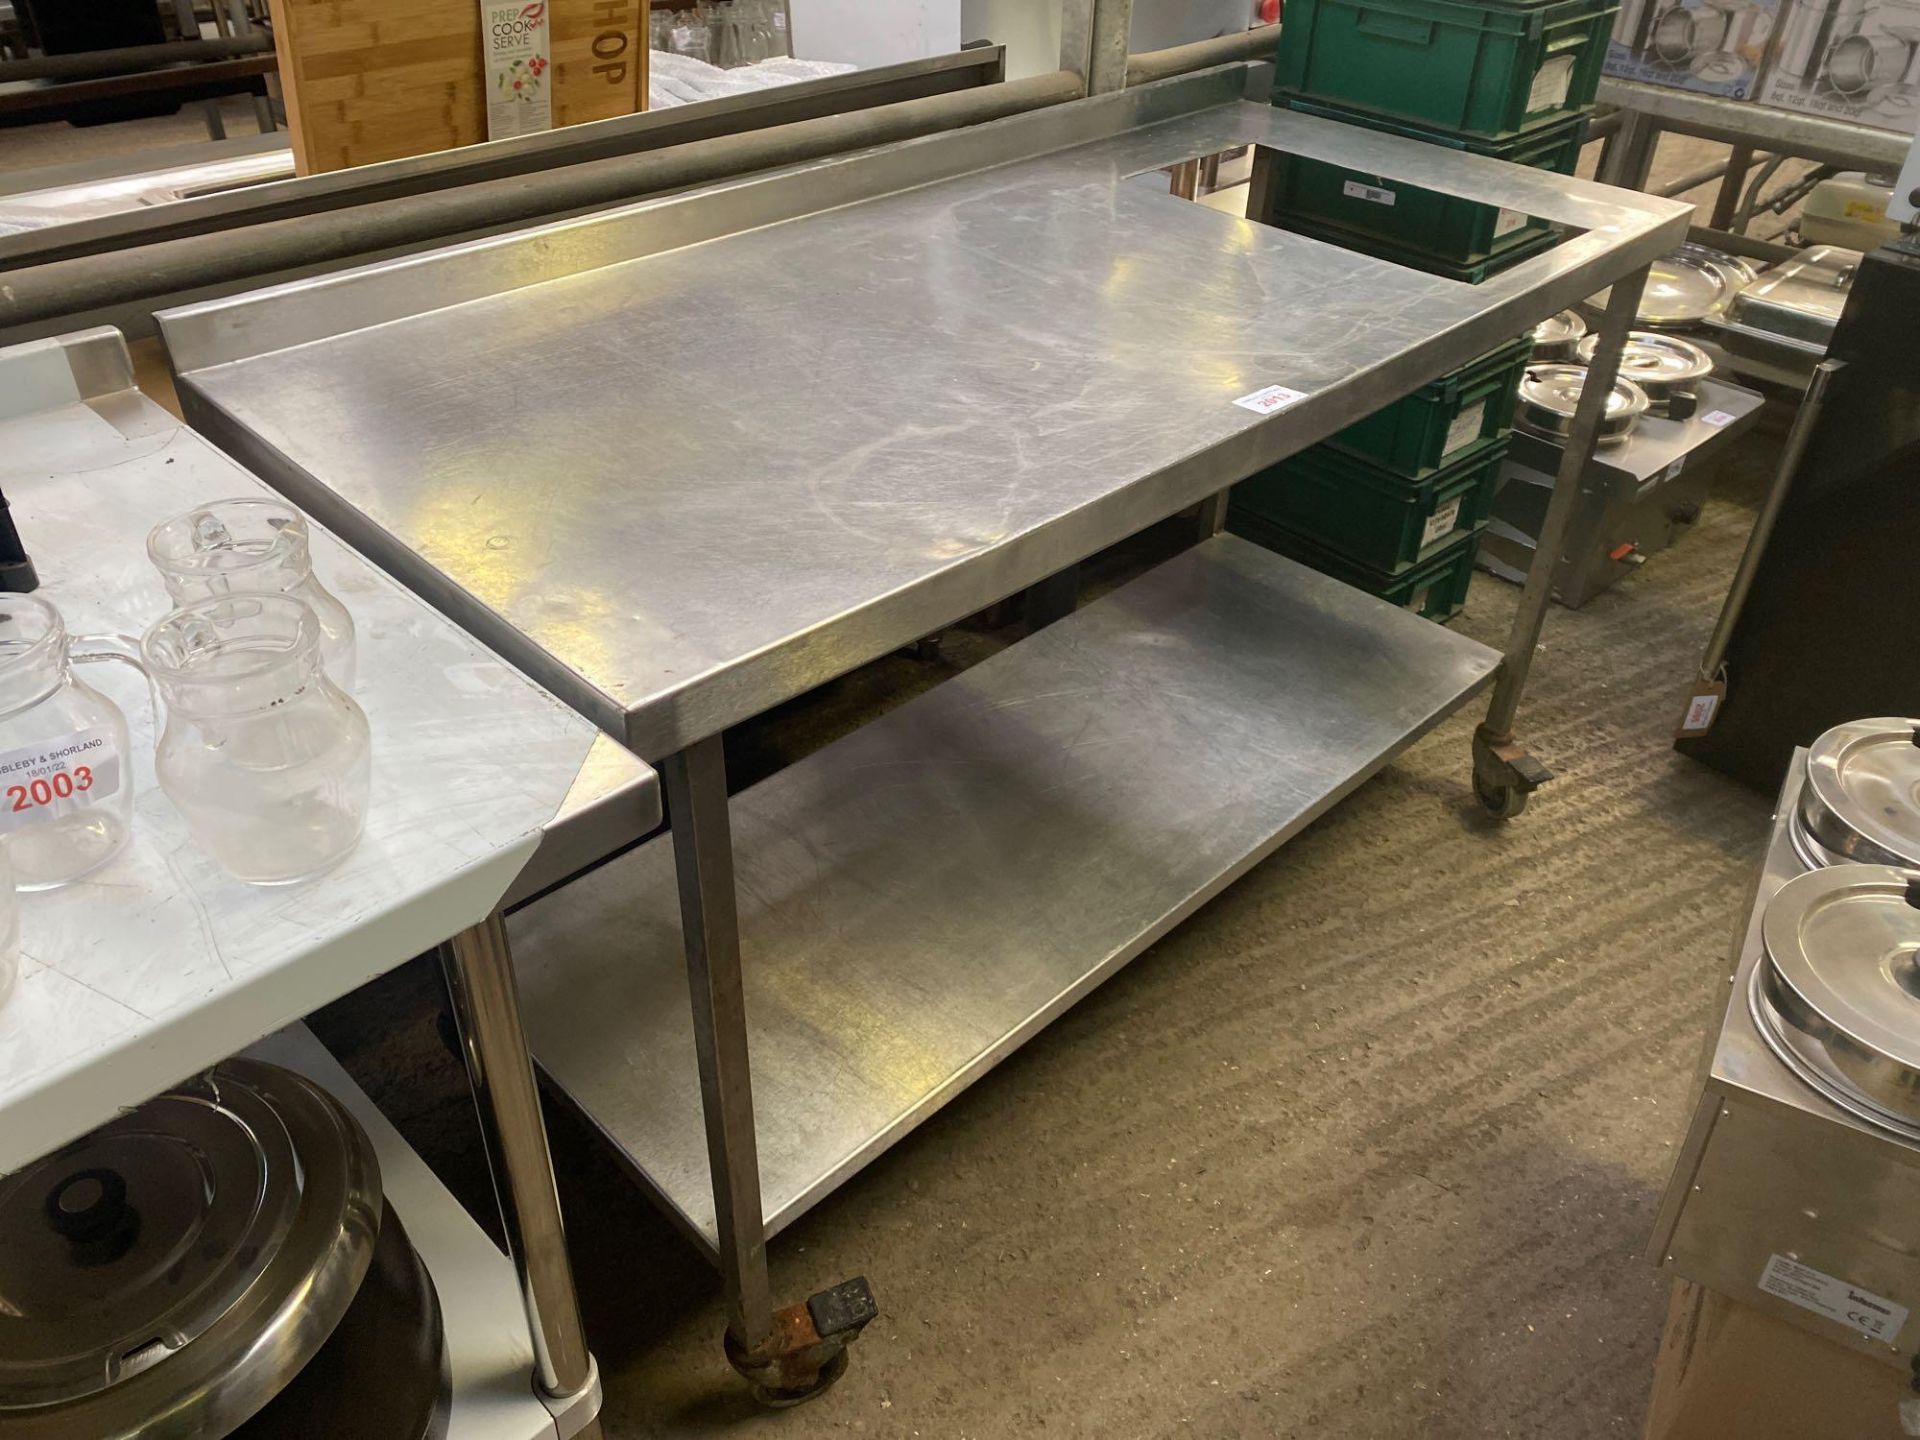 Mobile preparation table with undershelf and cut out.